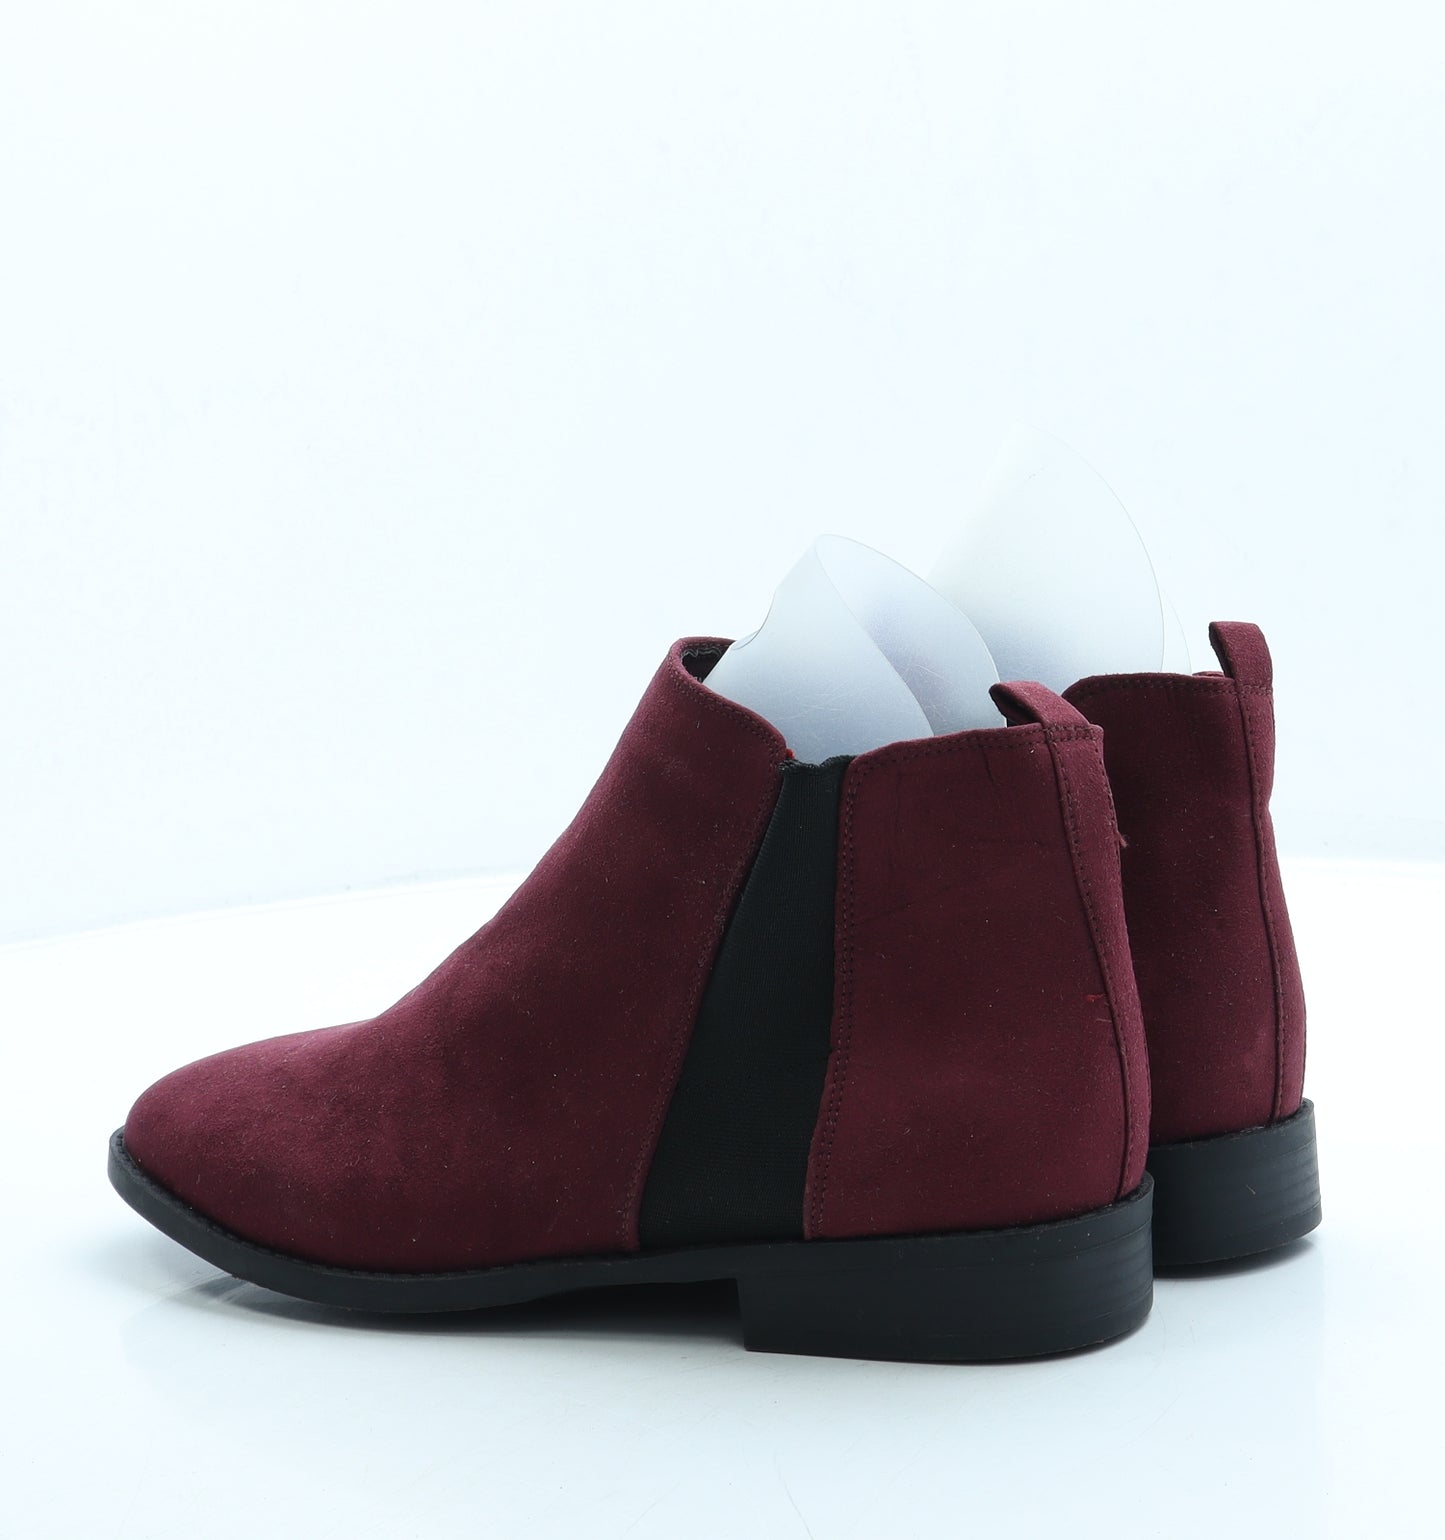 Primark Womens Red Suede Chelsea Boot UK 9 42 US 11 - Wide Fit